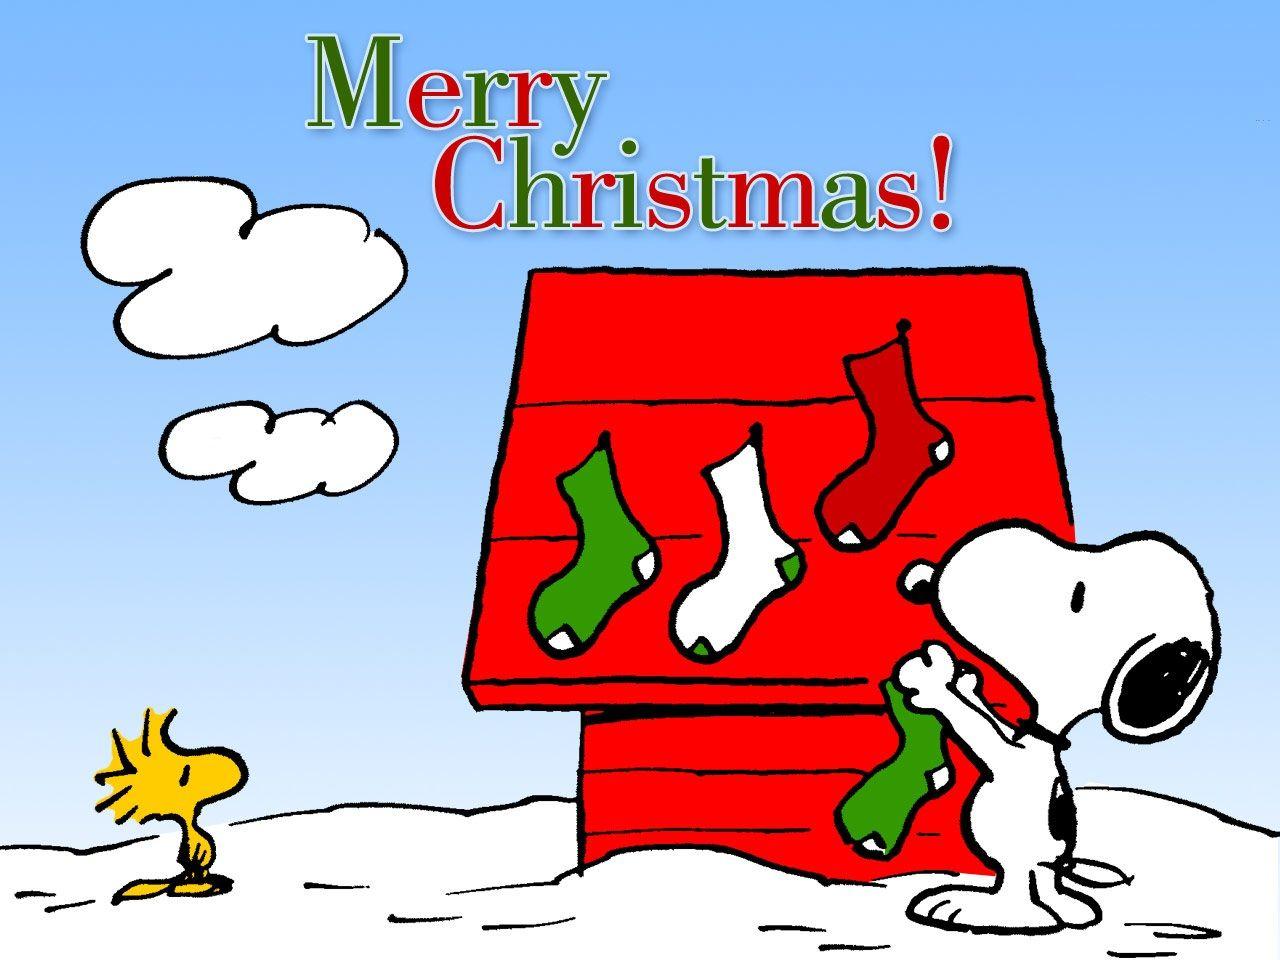 Snoopy Christmas Wallpapers Top Free Snoopy Christmas Backgrounds Wallpaperaccess